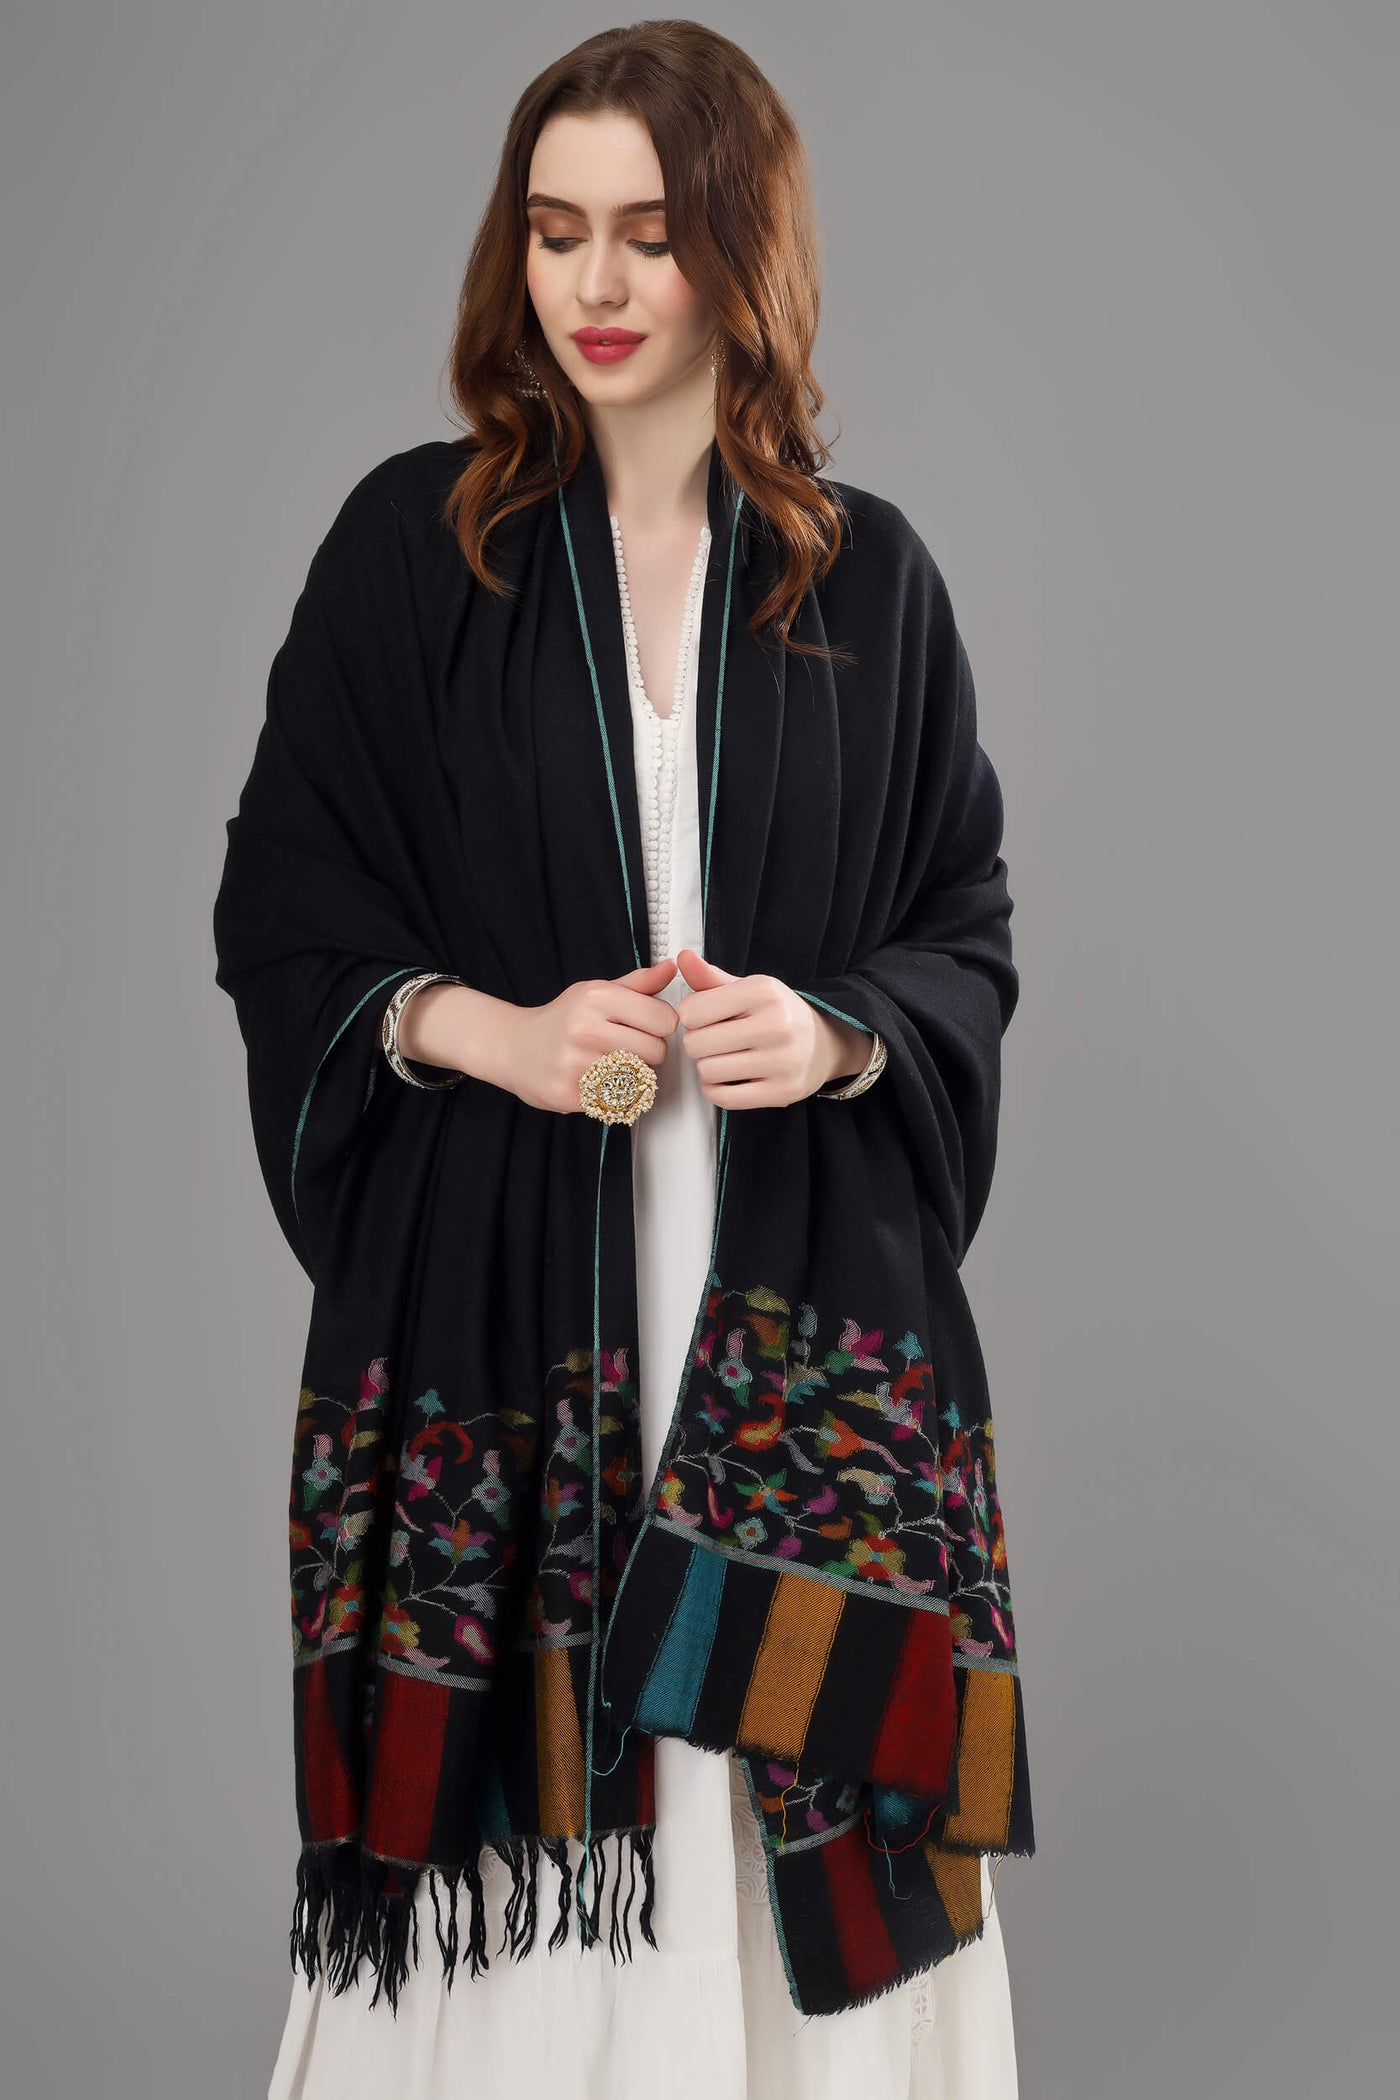 "KANI SHAWL - The Stylish and Luxurious Black Kani Pashmina Shawl, Crafted in Flower Designs on the Pallas in All the Ravishing Colors, Available online at - SWEDEN - HONGKONG - SPAIN - USA - CANADA - JAPAN - SOUTH AFRICA - GREECE - KUWAIT - NORWAY."